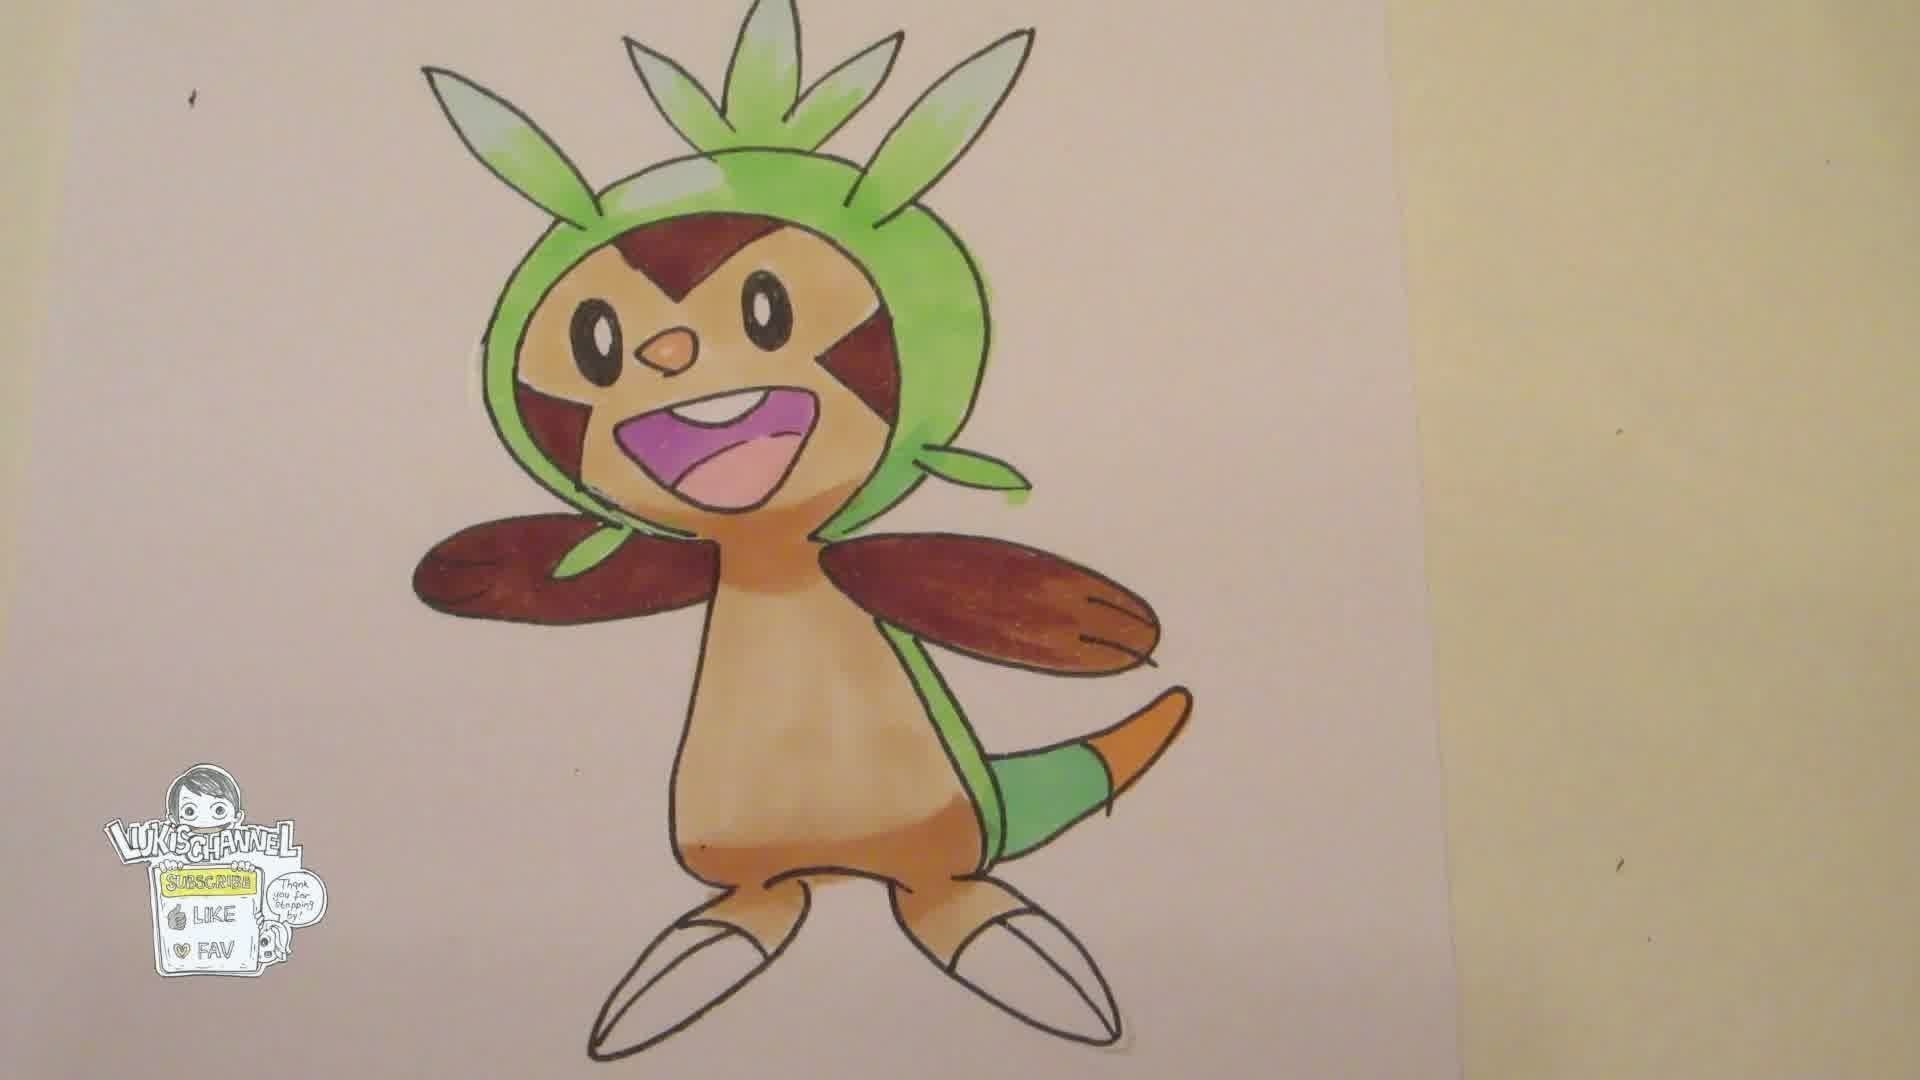 1920x1080 [Tutorial] How to draw Chespin from Pokemon X and Pokemon Y